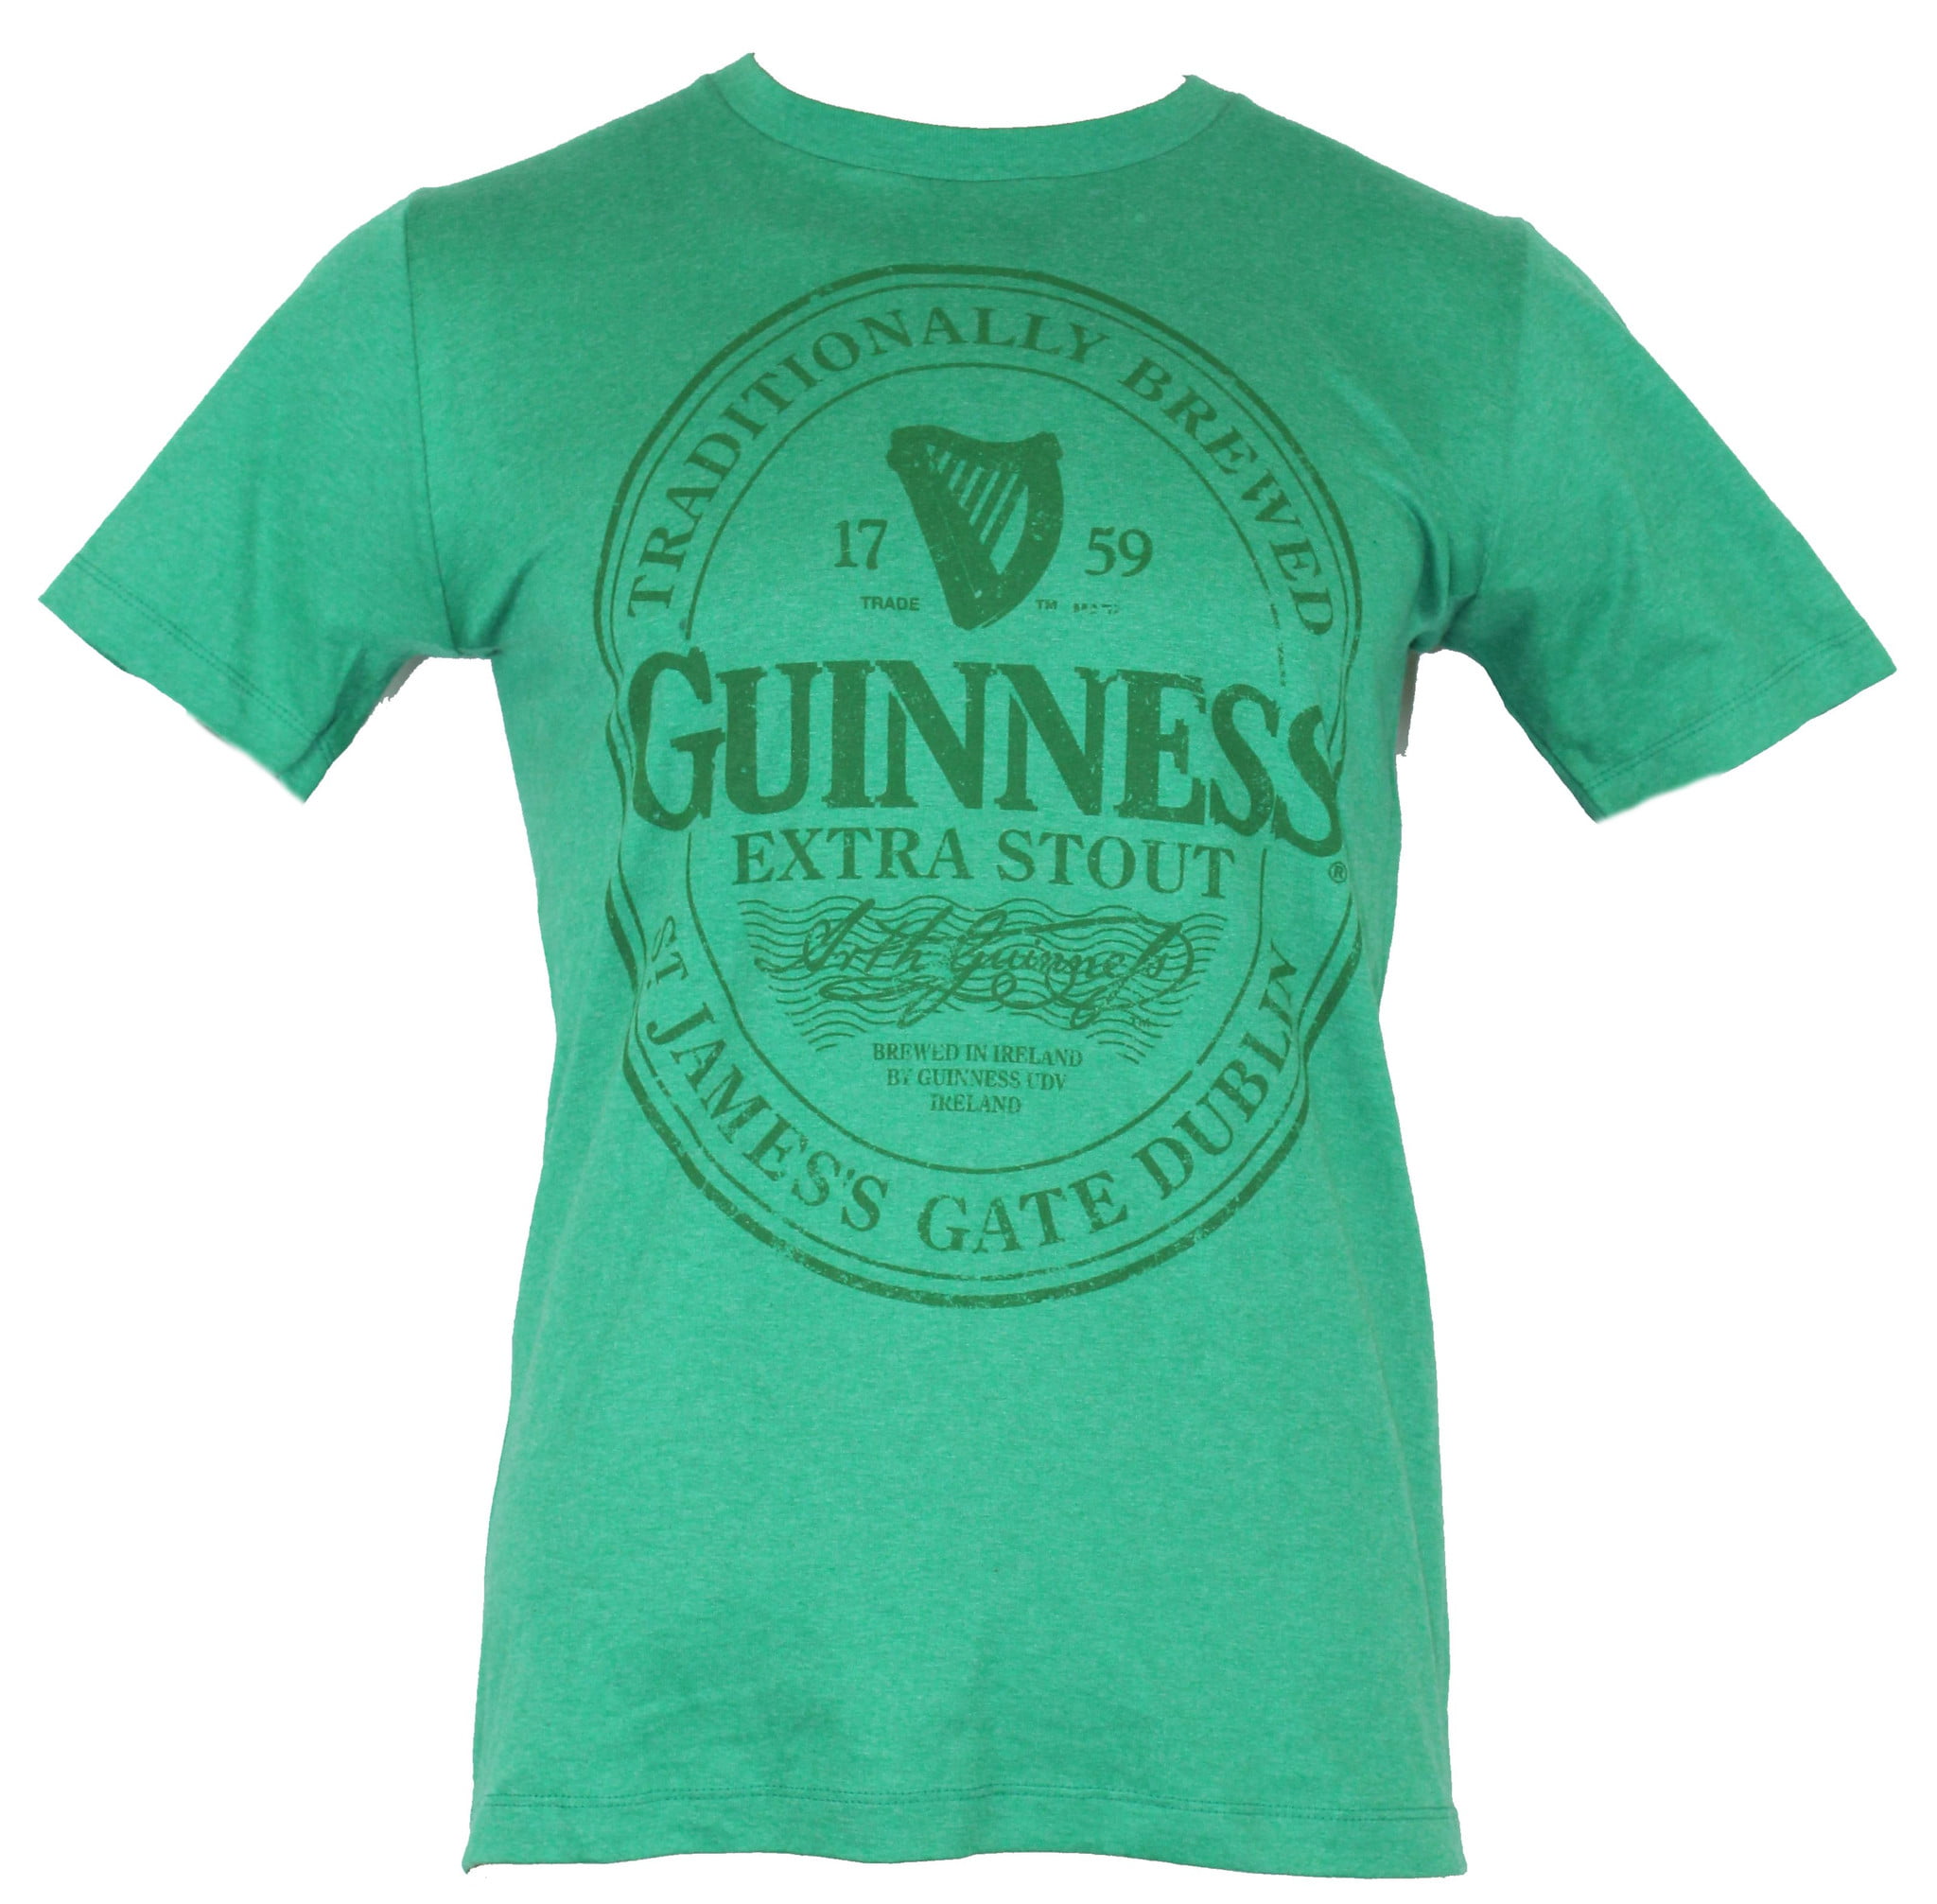 IN MY PARENTS BASEMENT - Guinness Beer Mens T-Shirt ...